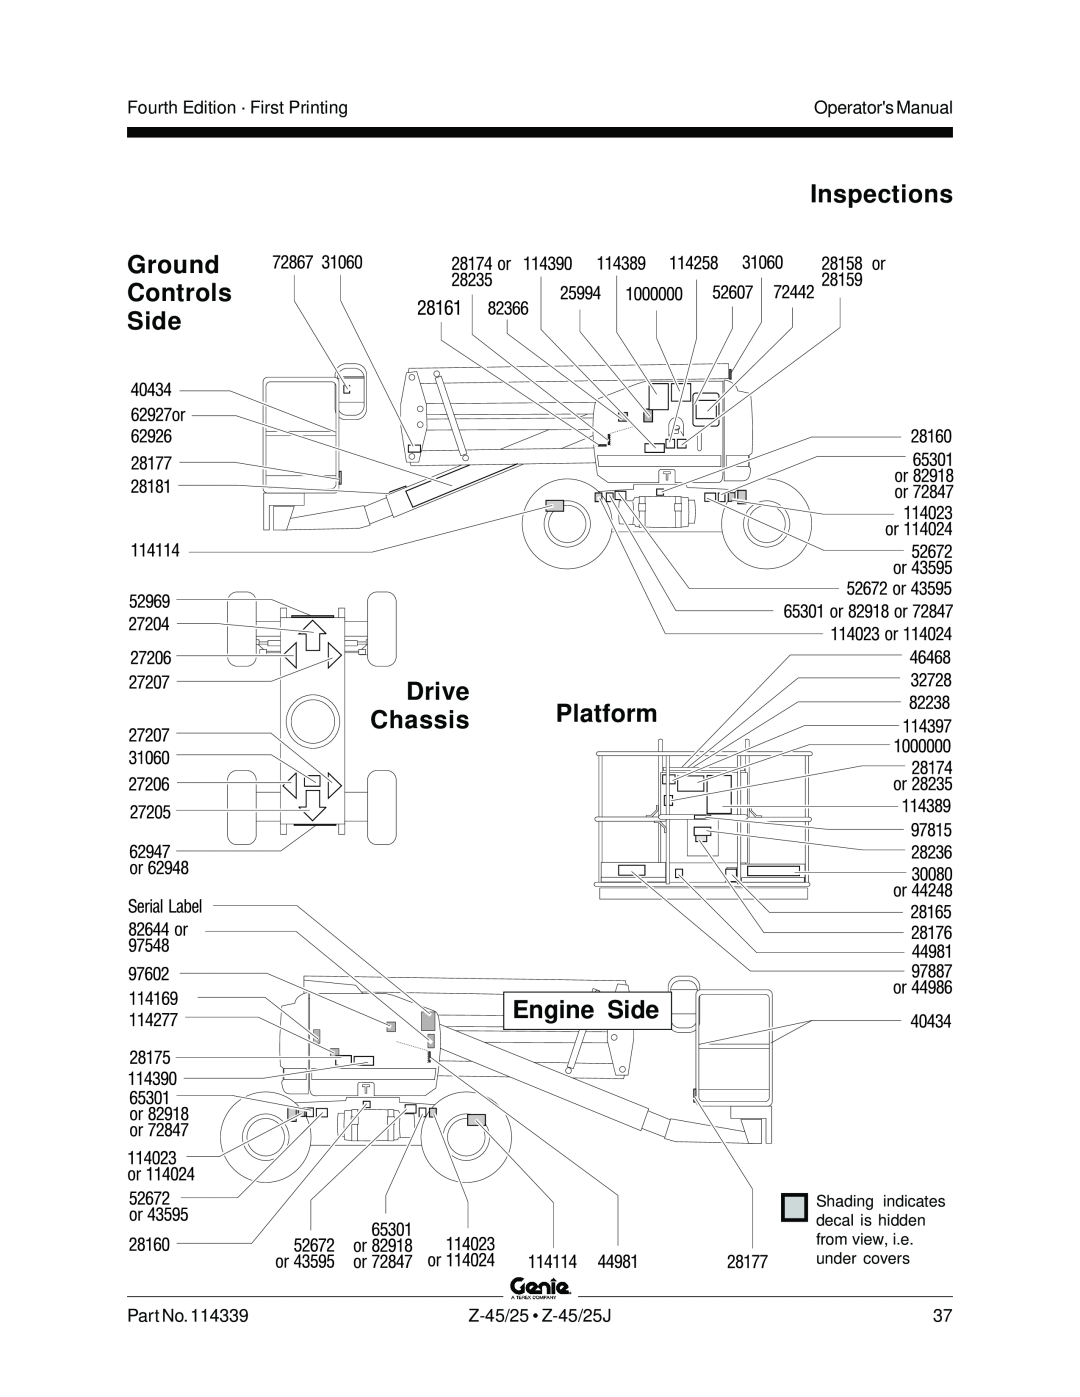 Genie Z-45, Z-25J Inspections Ground Controls Side Drive, Chassis Platform Engine Side, Fourth Edition · First Printing 